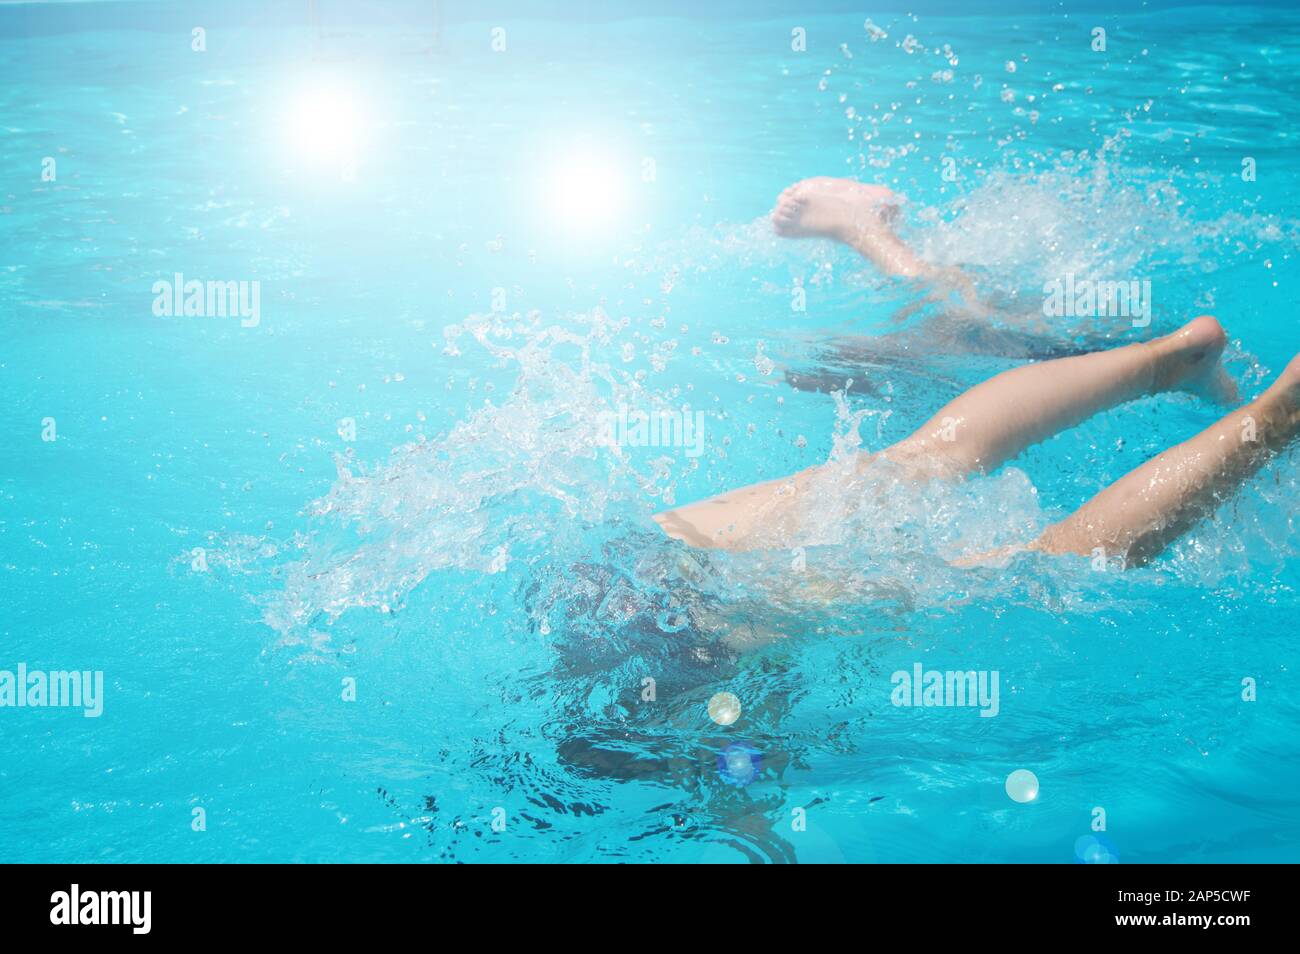 Children teenagers girls have fun swimming and diving in the outdoor pool, feet up over the water, splashing, sunlight, glare, summer day Stock Photo